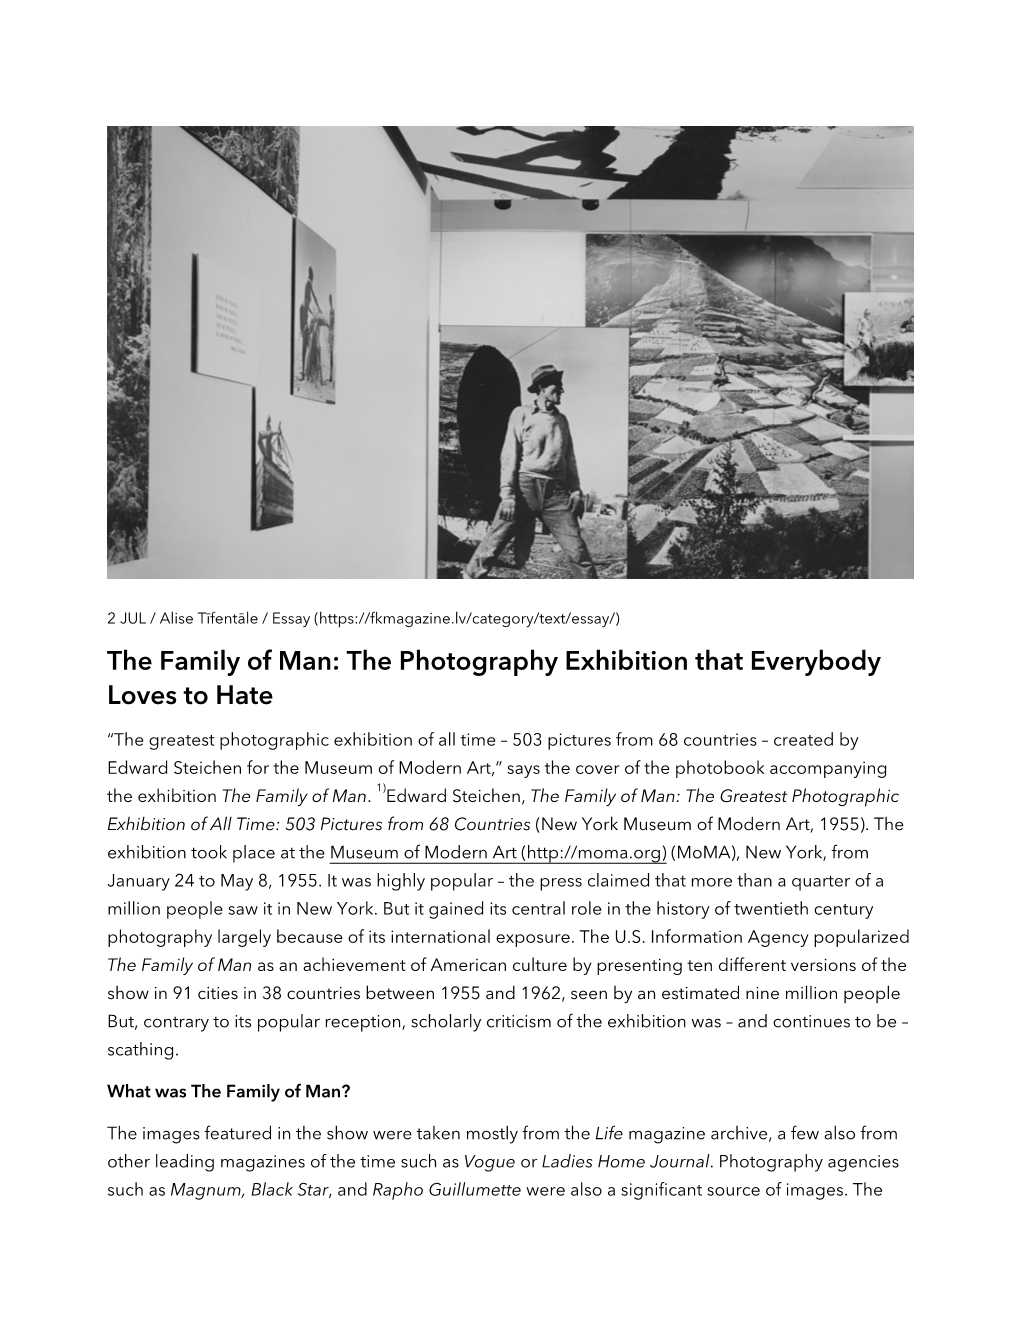 The Family of Man: the Photography Exhibition That Everybody Loves to Hate